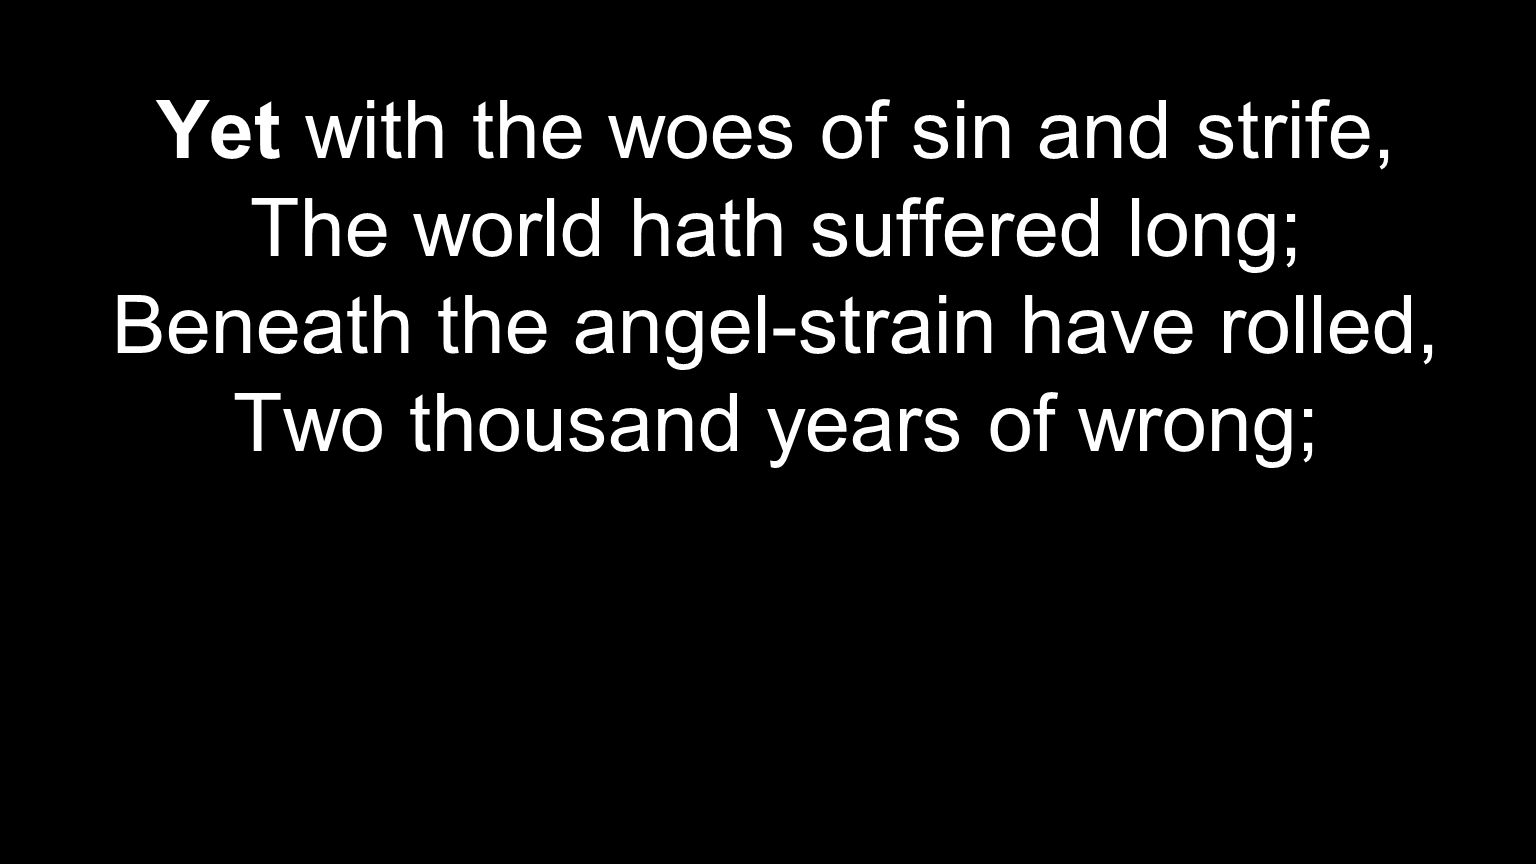 Yet with the woes of sin and strife, The world hath suffered long; Beneath the angel-strain have rolled, Two thousand years of wrong;